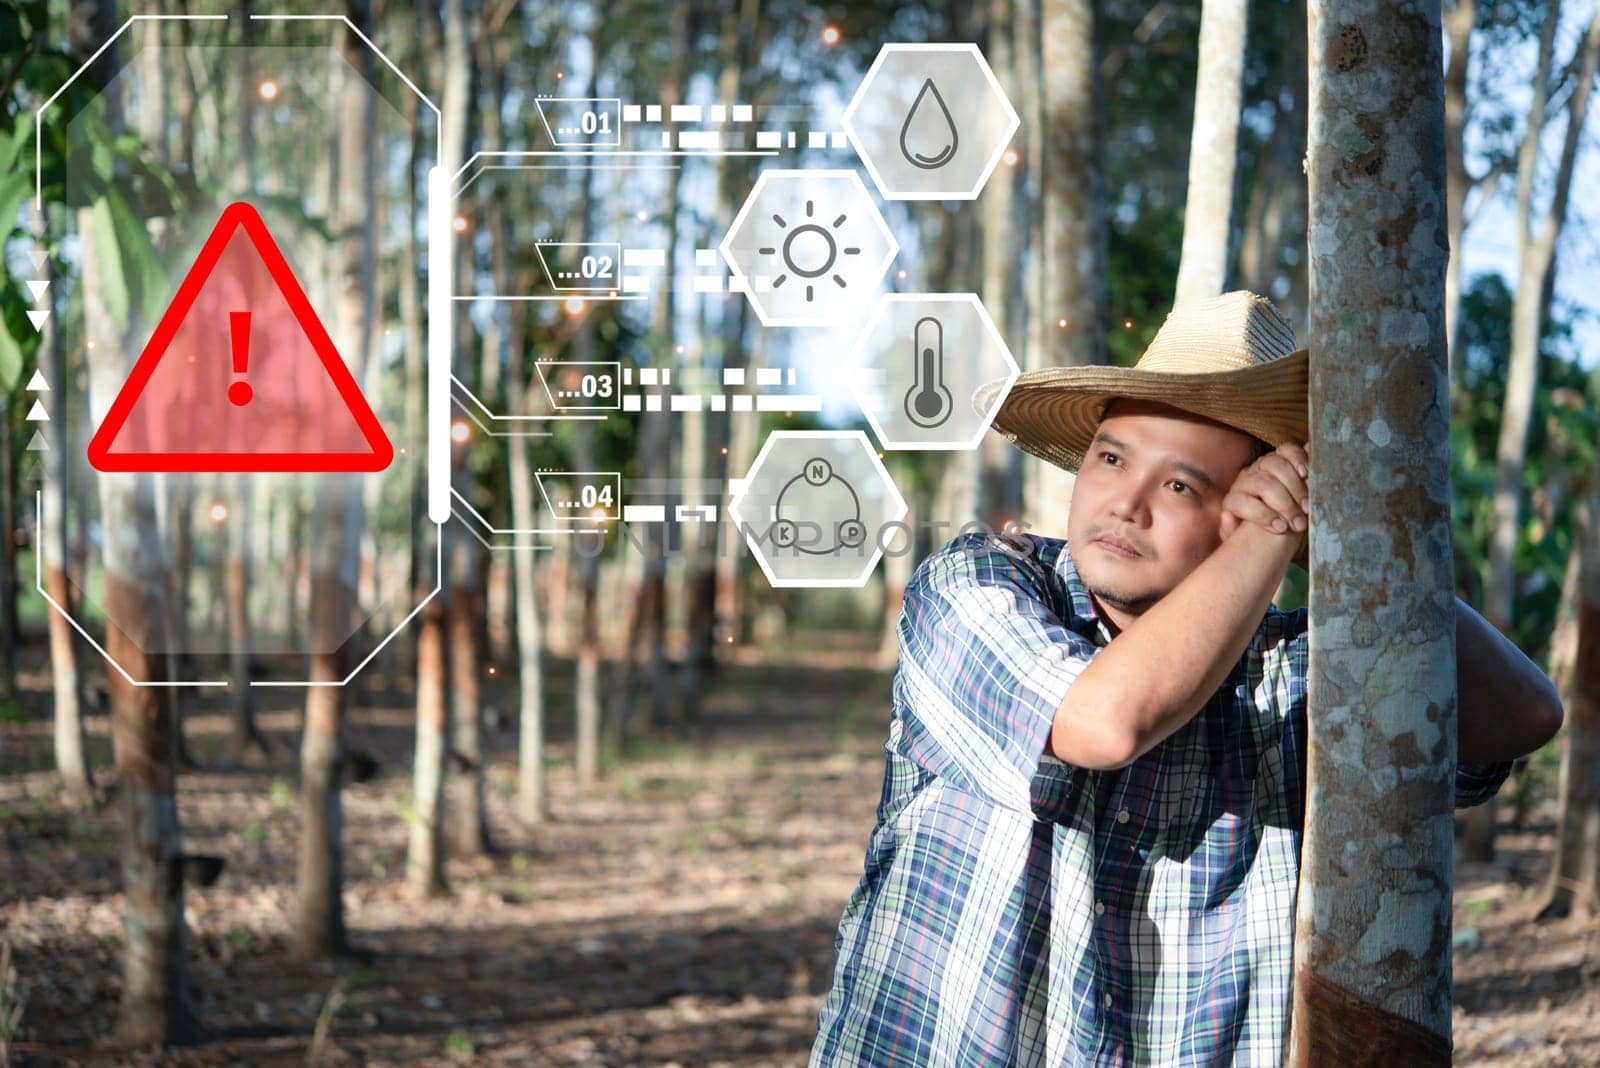 Smart farm digital icon and futuristic AI data infographic of Farmer agriculturist unhappy low yield productivity at rubber tree plantation is agriculture harvesting natural rubber industry Thailand